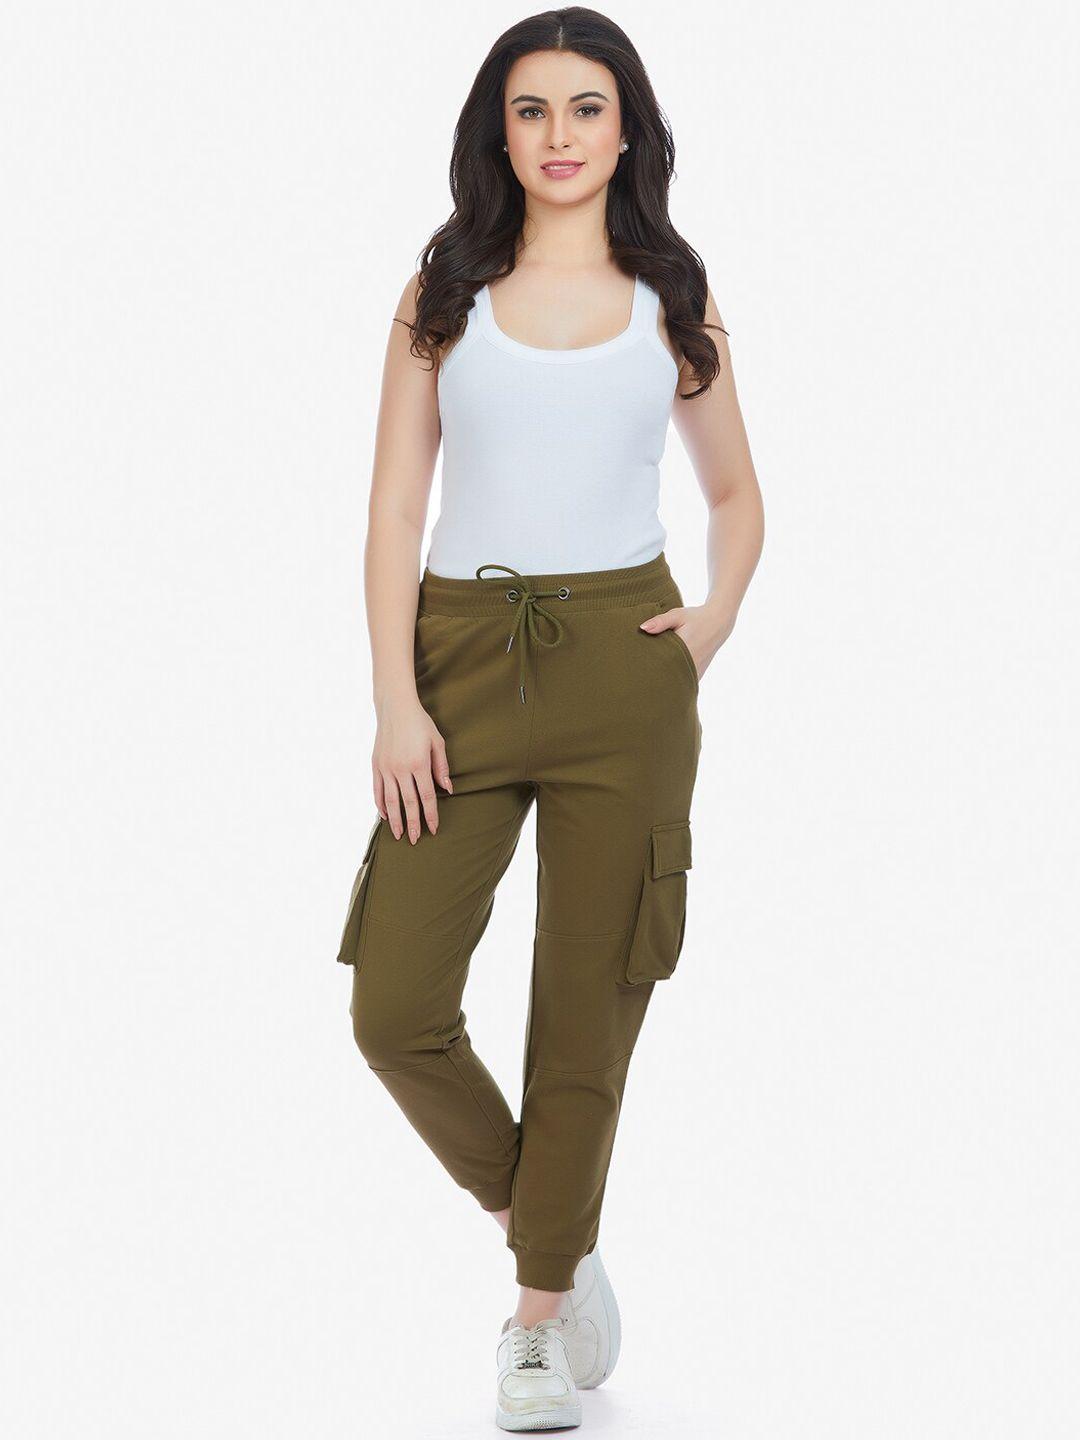 maysixty women relaxed fit mid-rise joggers